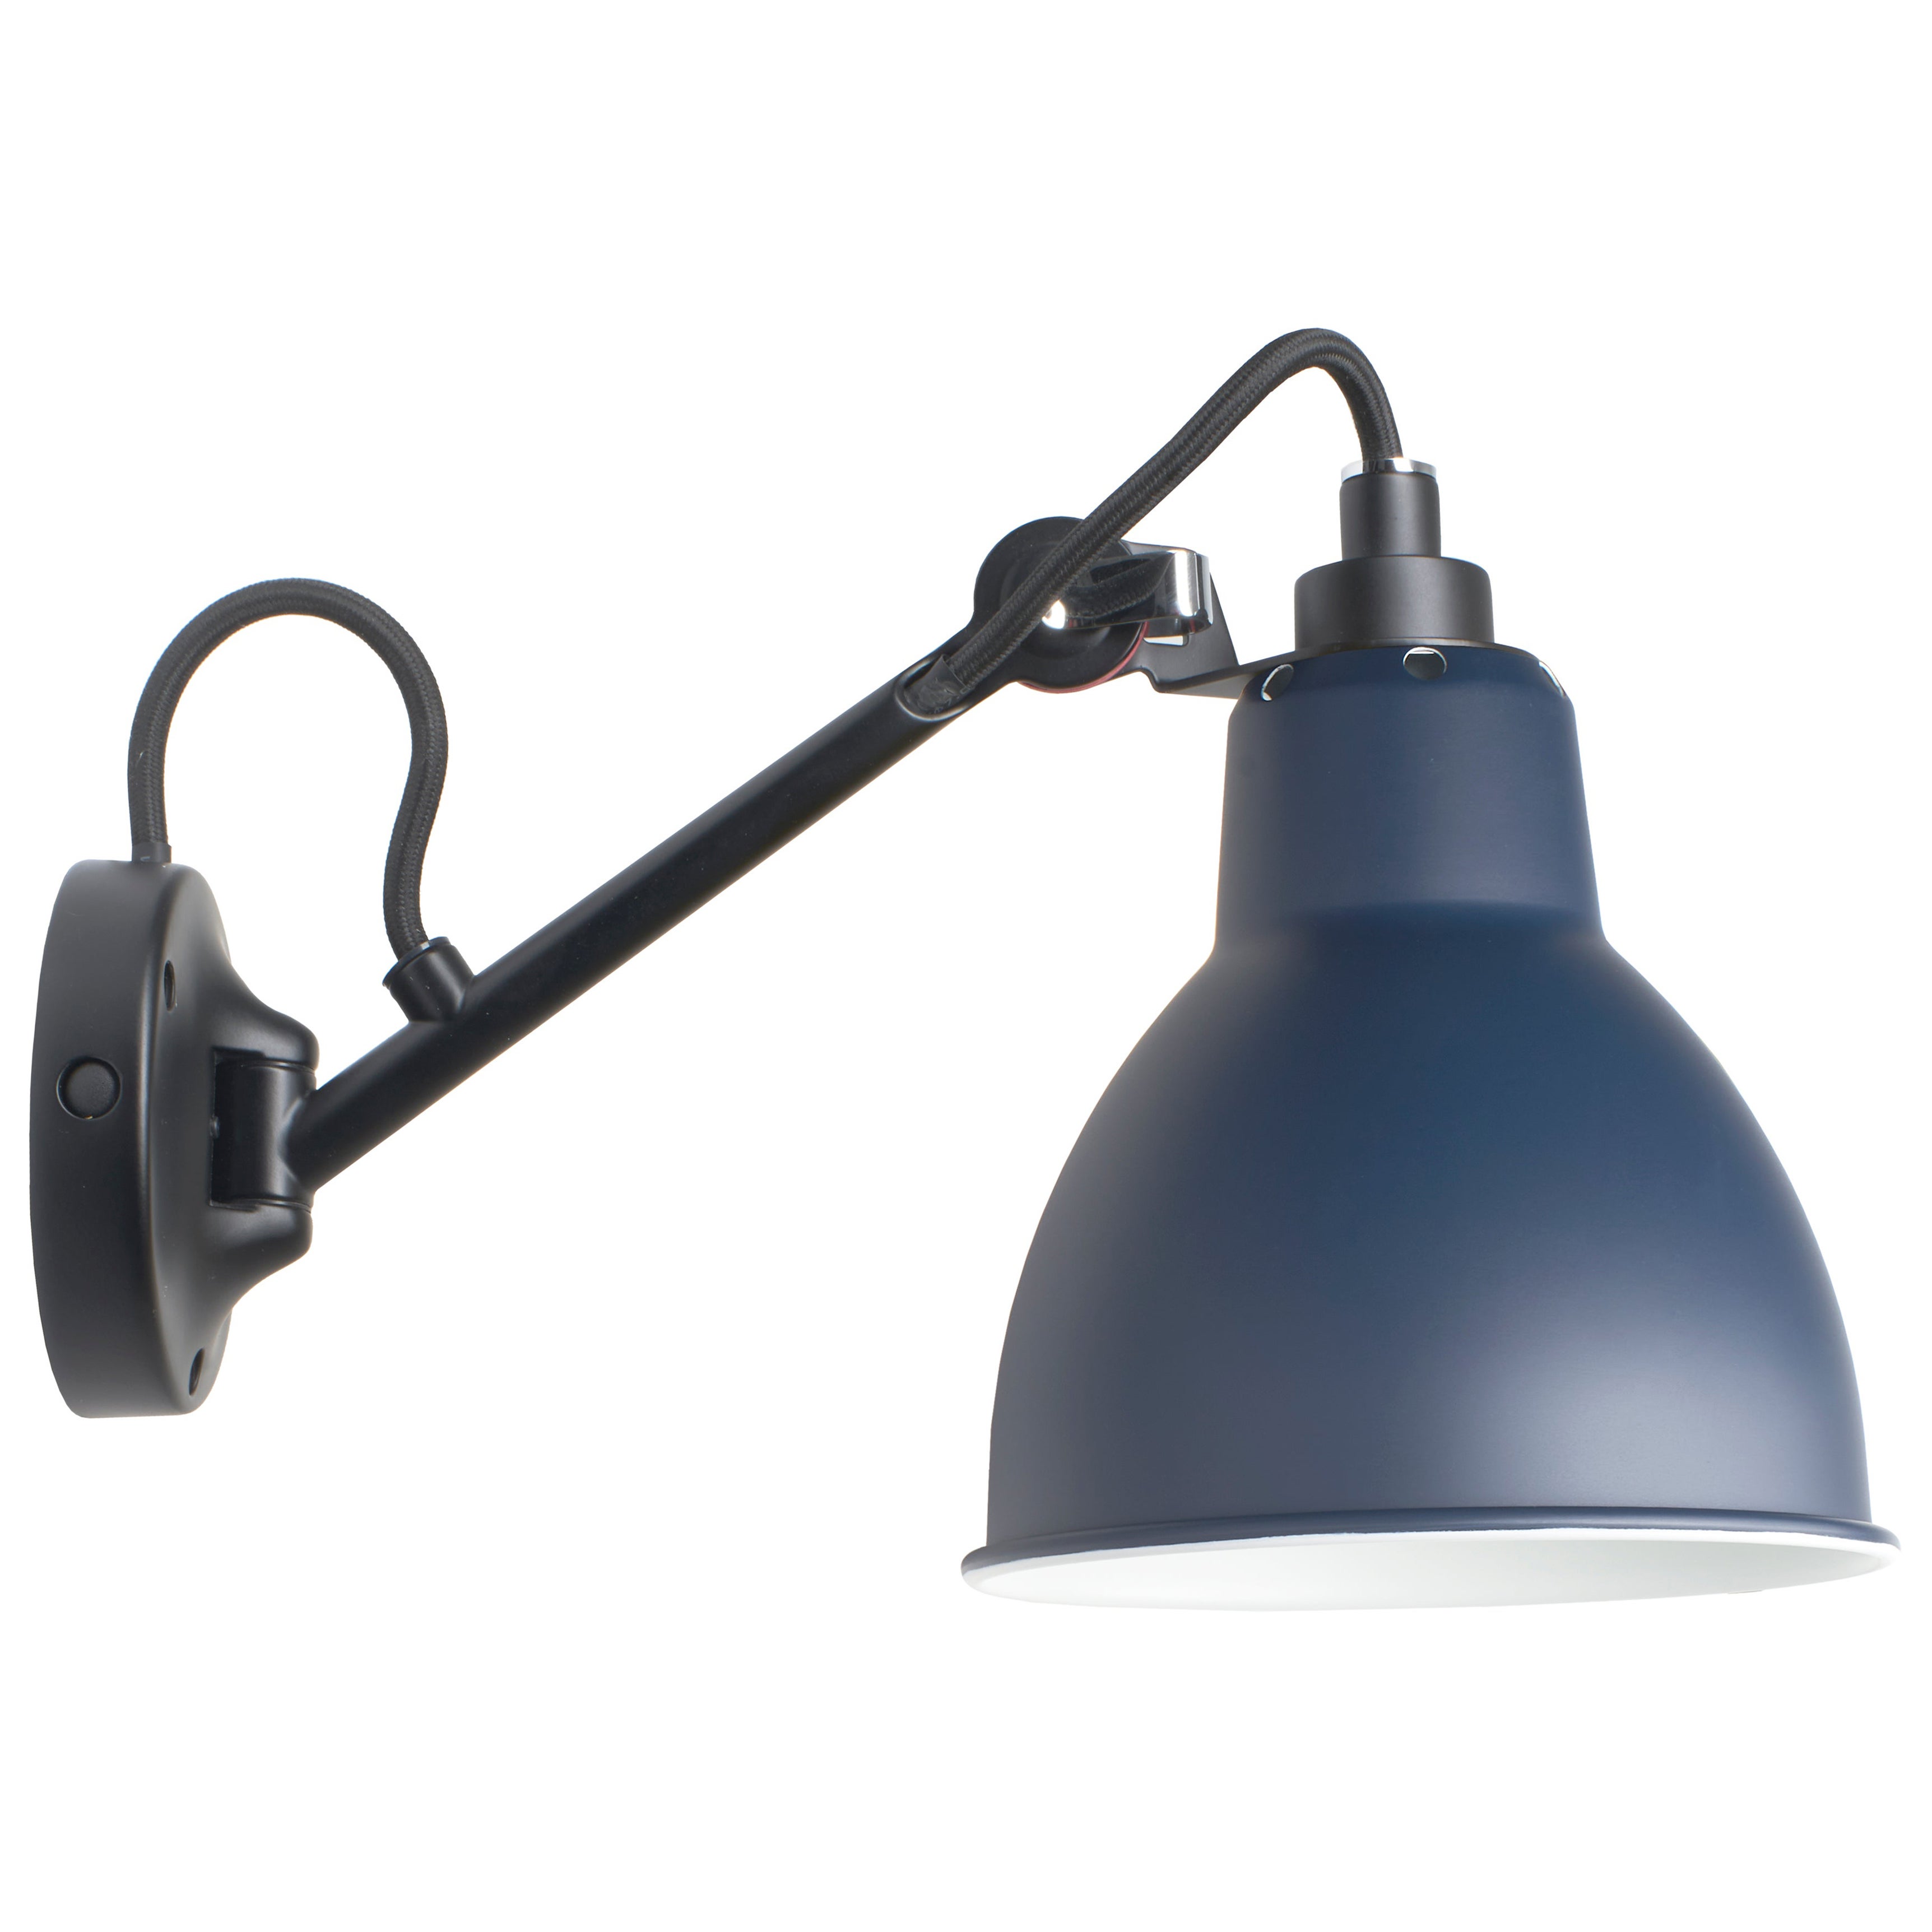 DCW Editions La Lampe Gras N°104 Wall Lamp in Black Arm and Blue Shade For Sale